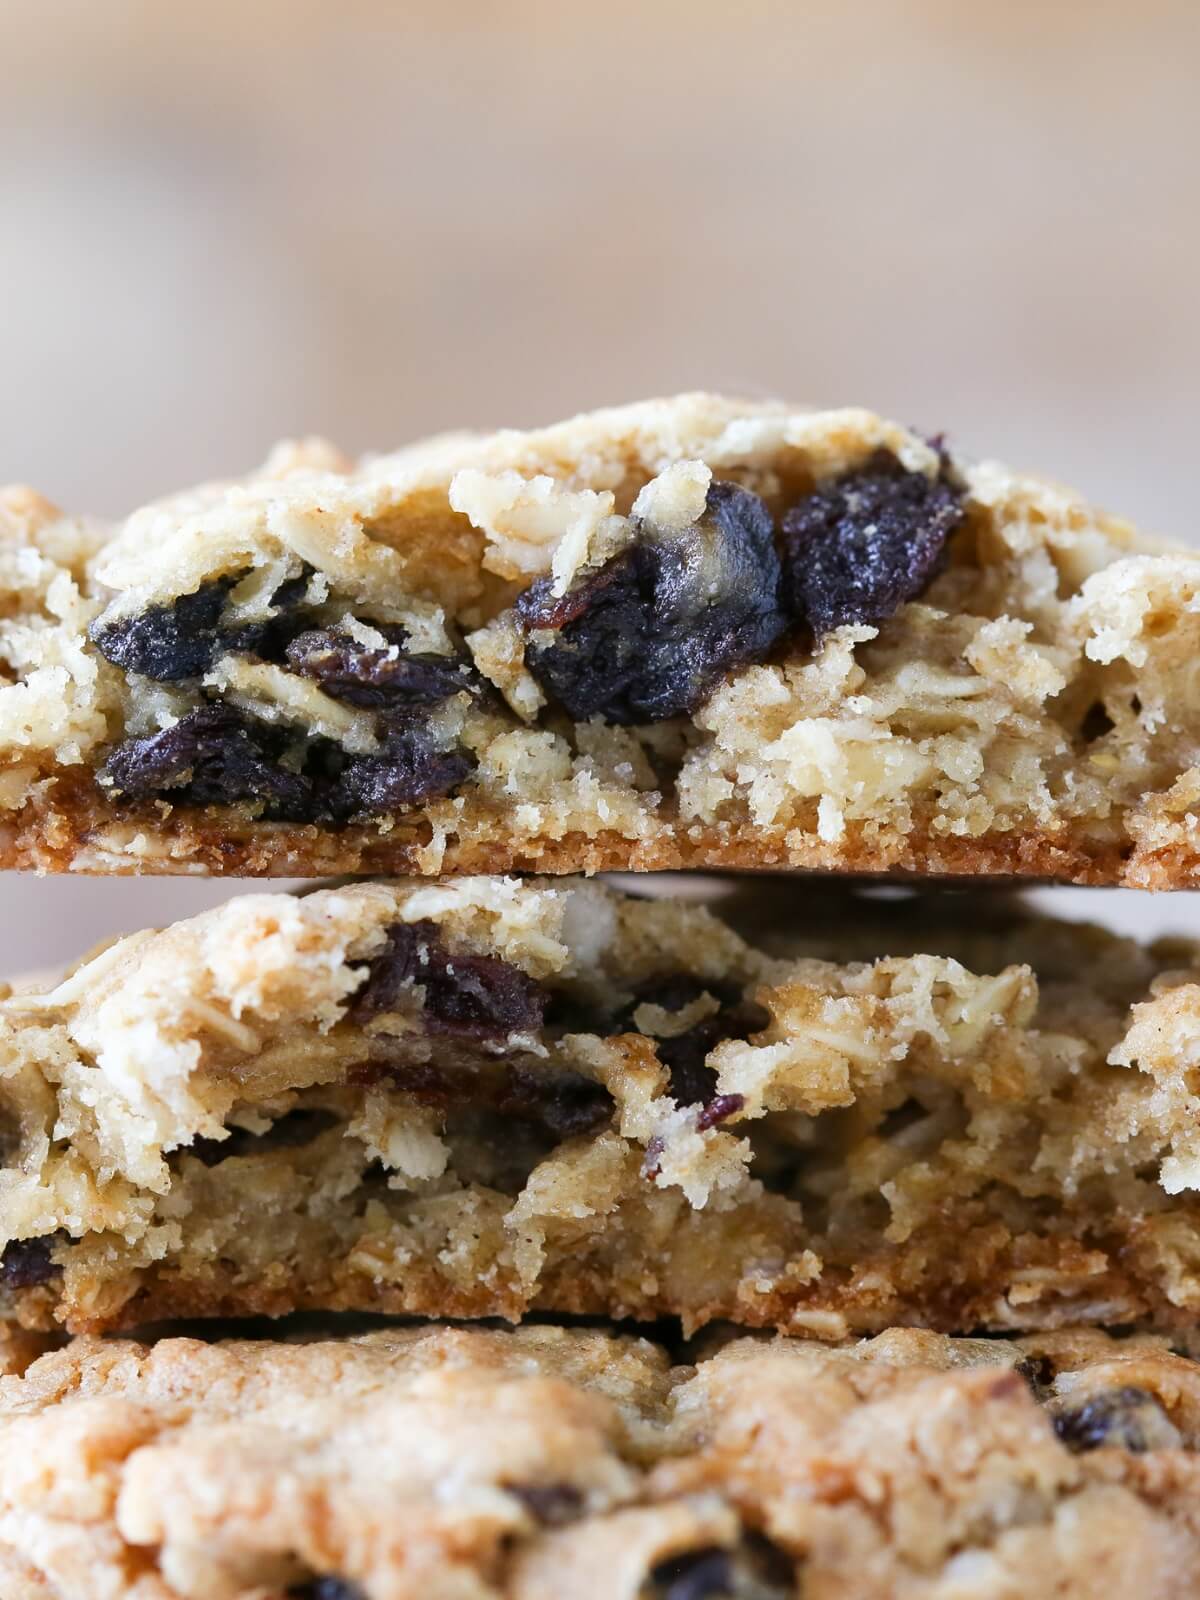 A stack of three oatmeal raisin cookies with the top ones cut in half to show a chewy interior.